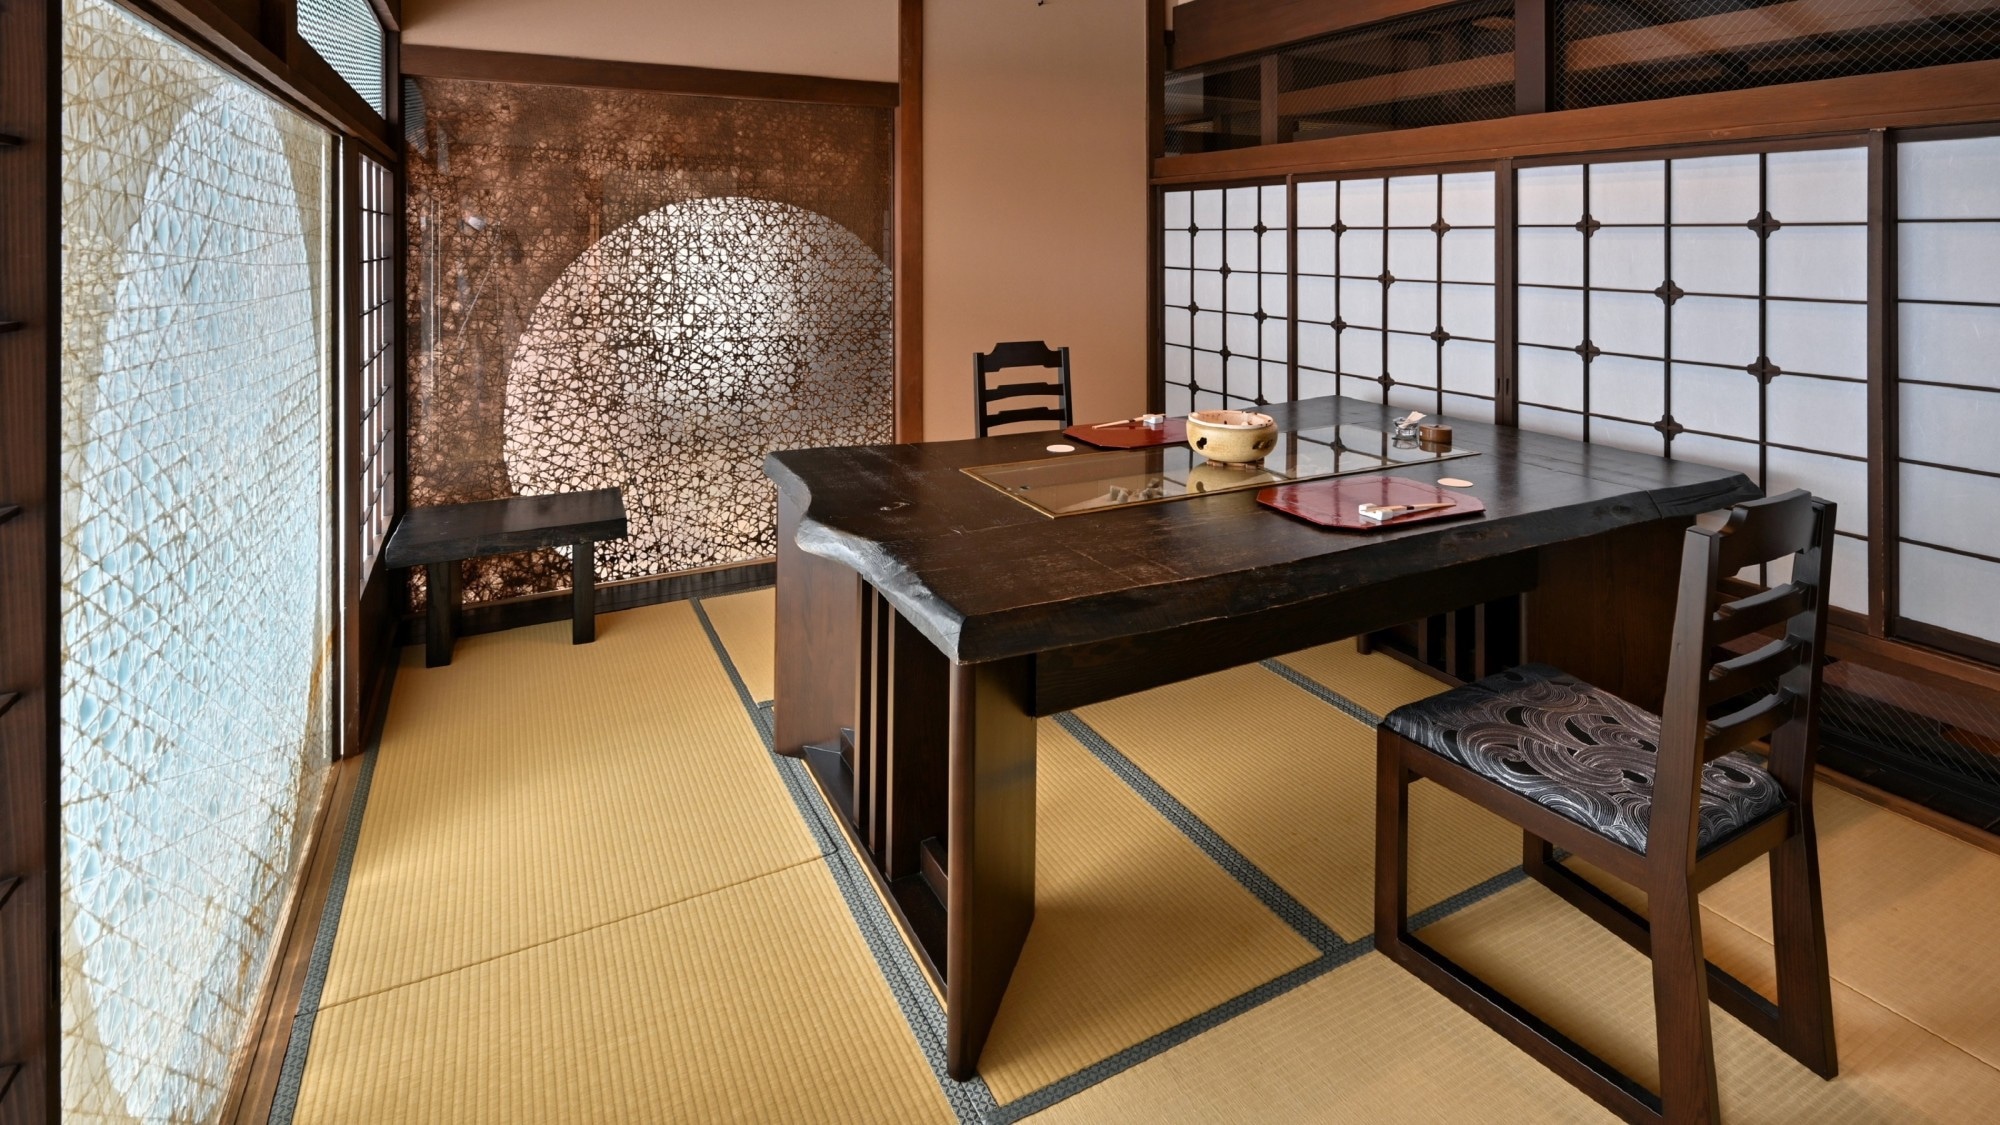 ■ Cooking teahouse "Hina" / Have a fun time in a private room with a simple and calm atmosphere (* An example of a private room)